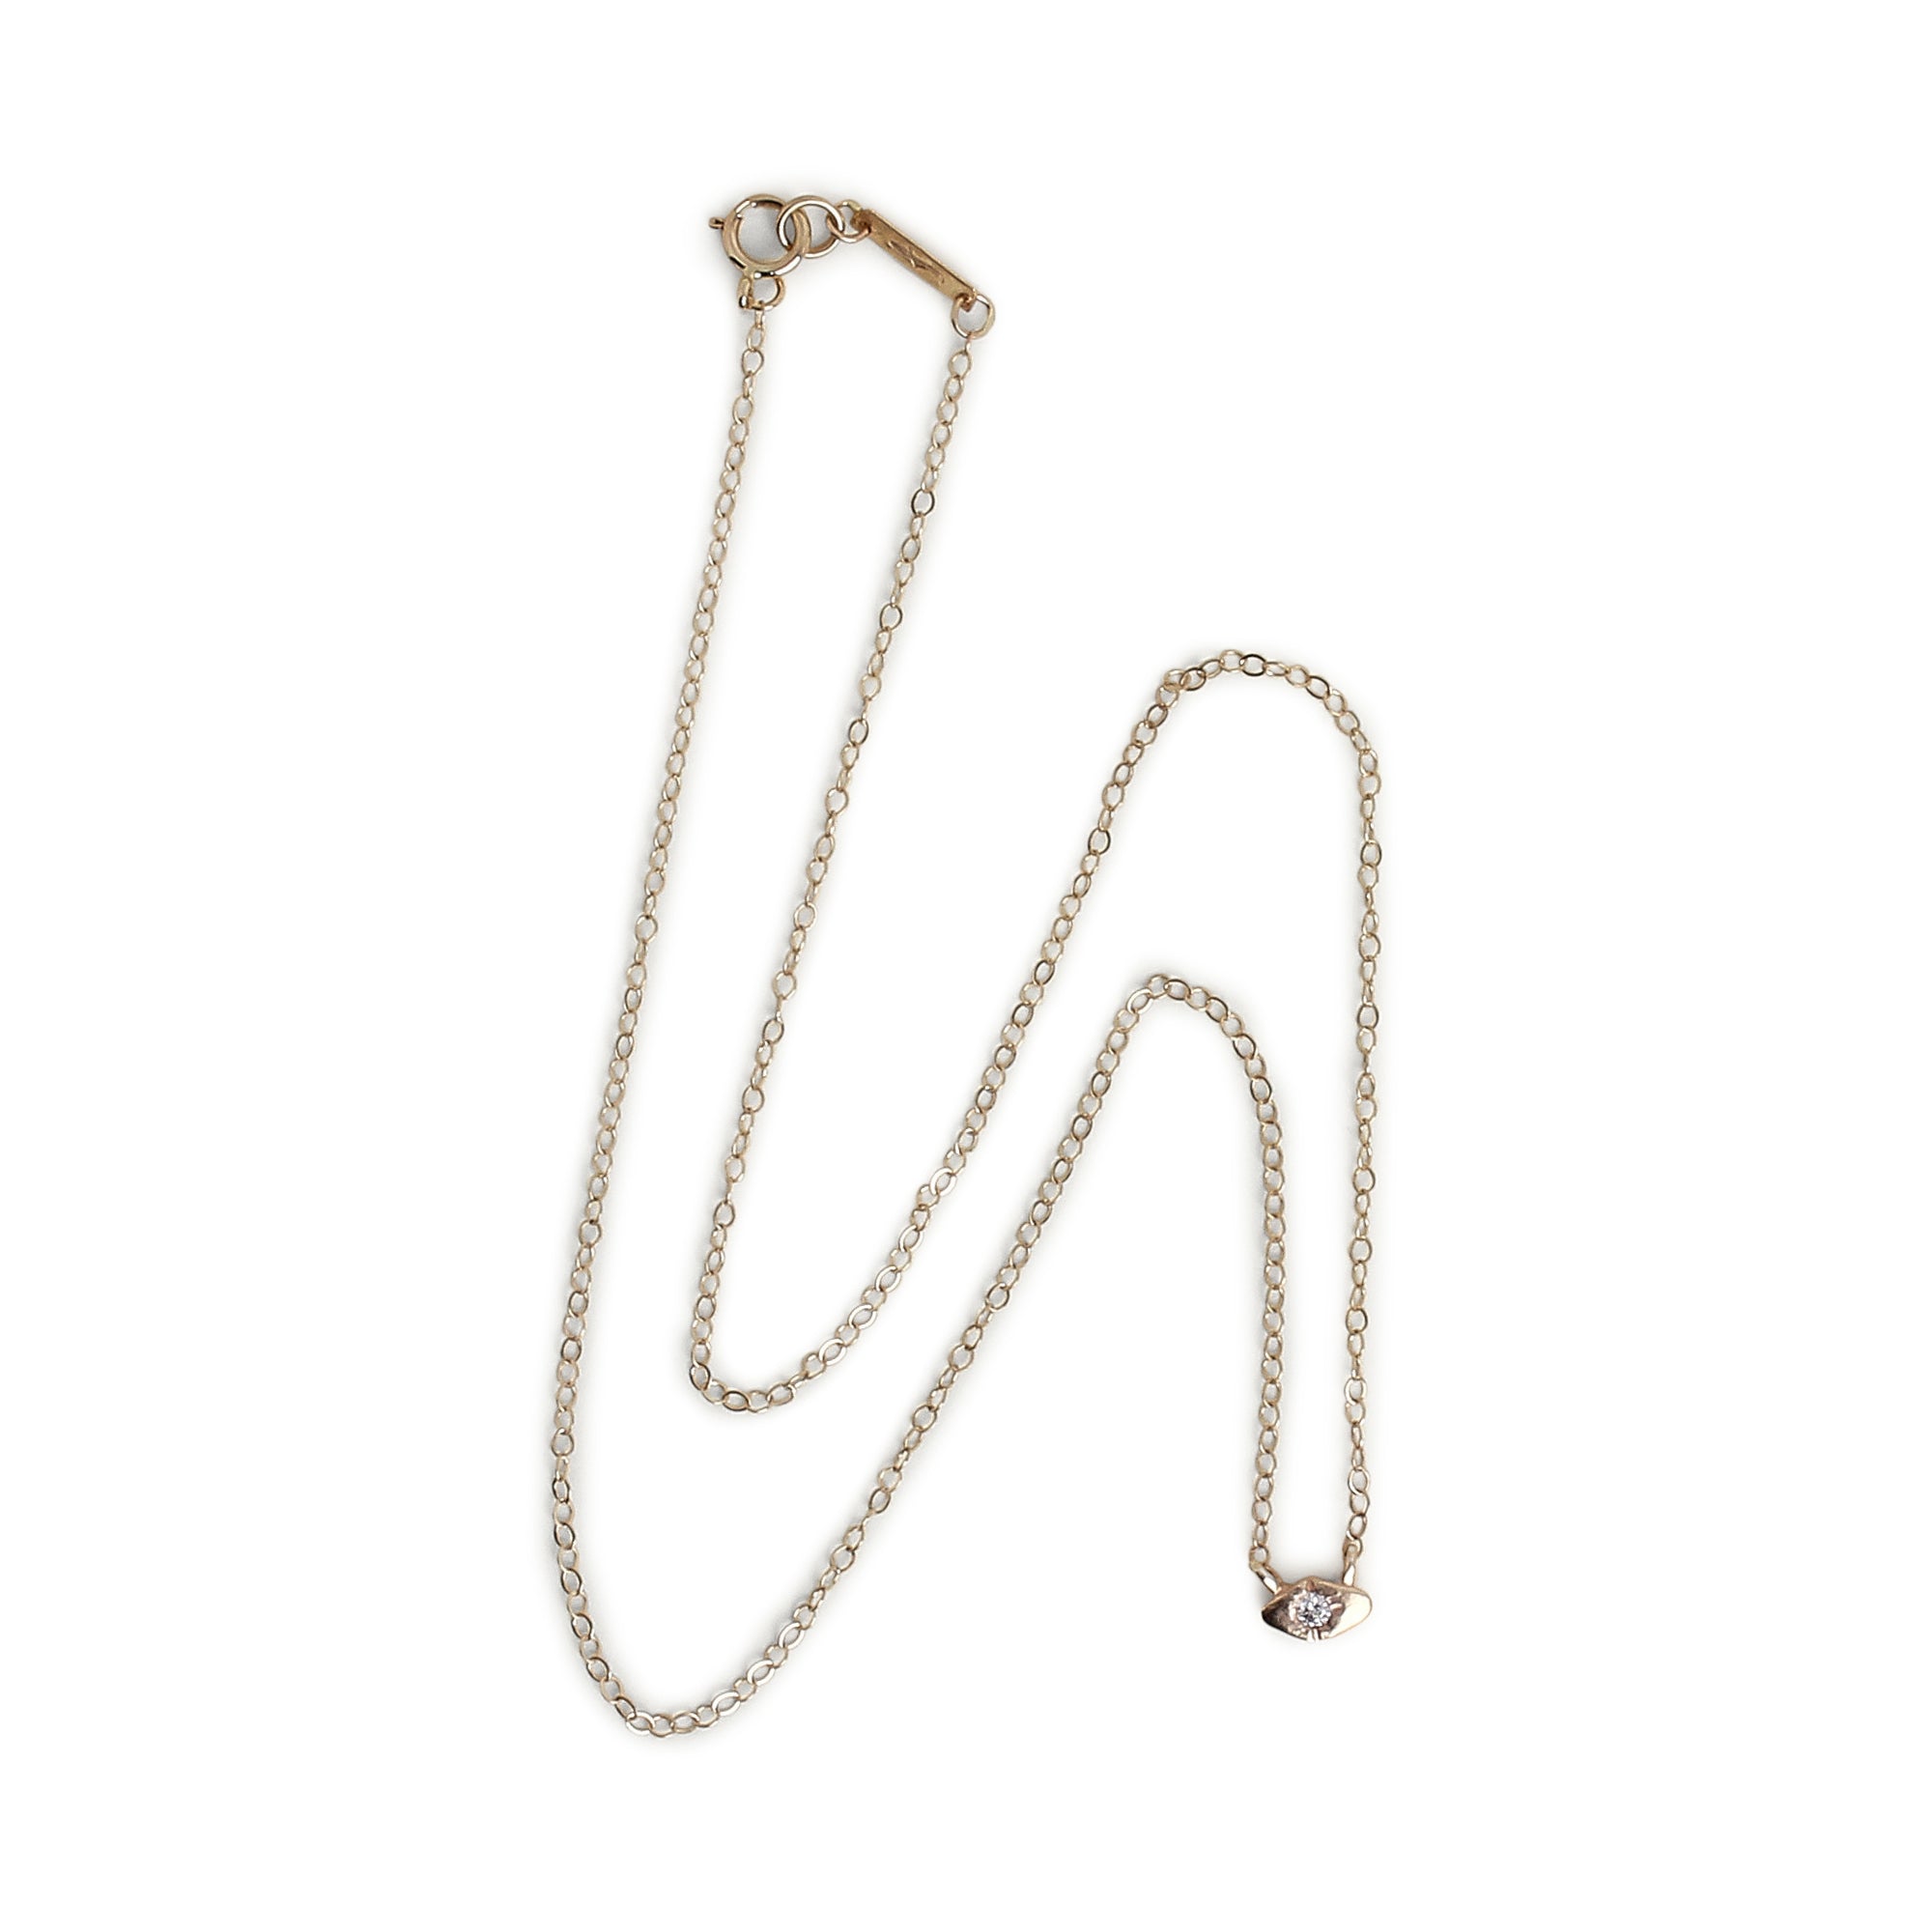 The delicate Slope Necklace is perfect for everyday wear with a single 0.04 tcw diamond flush set in 14K gold.